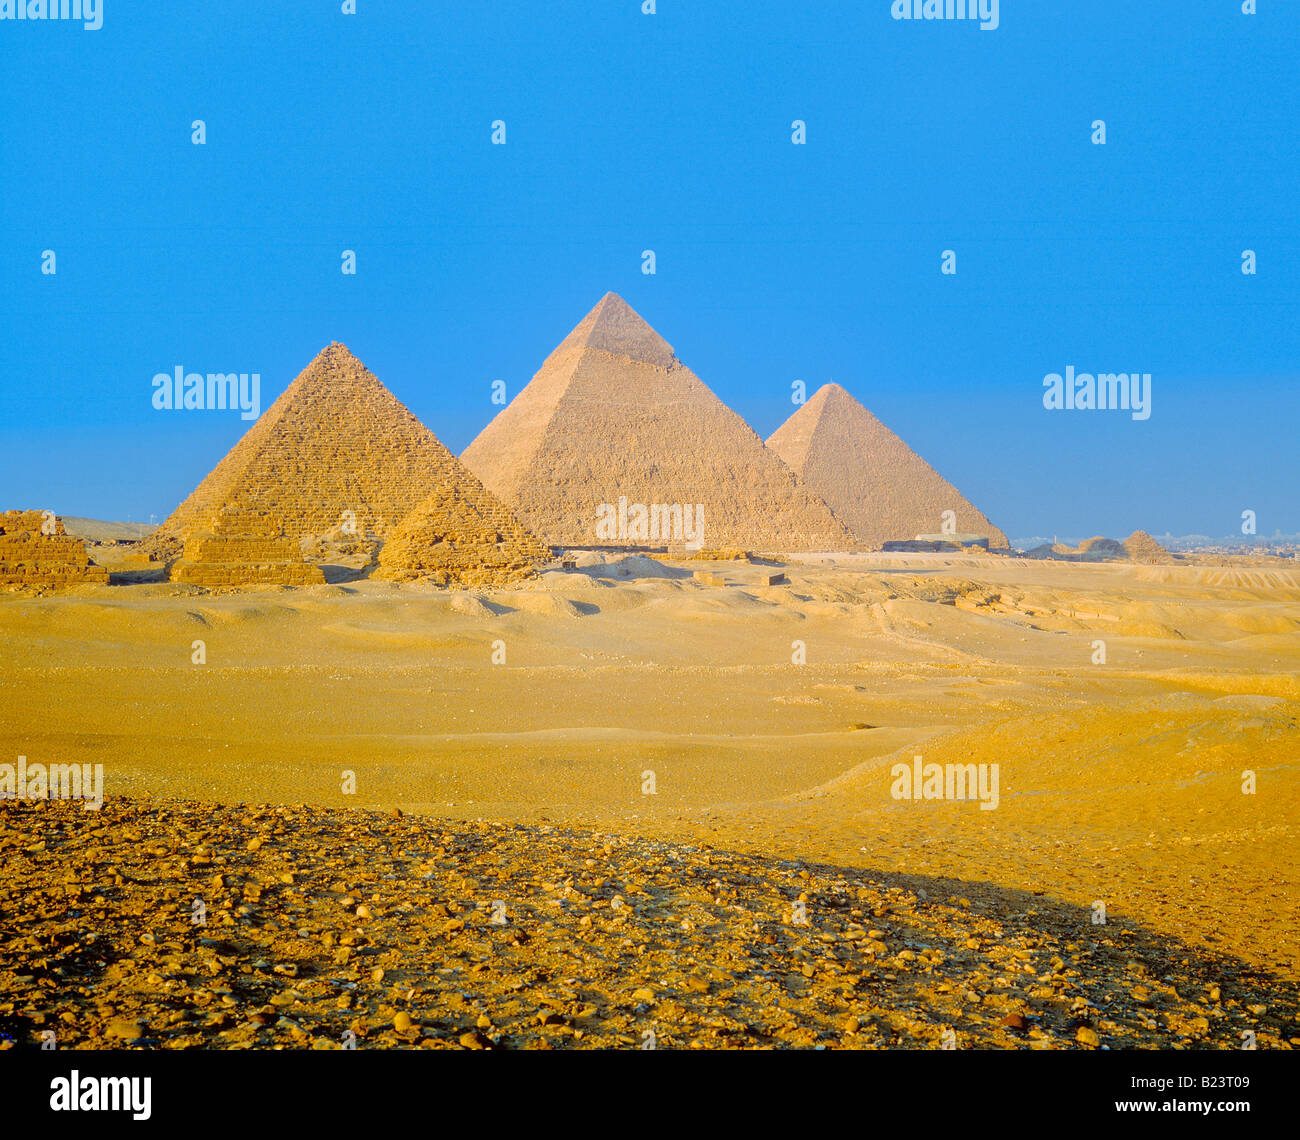 pyramid of mykerinos front and pyramid of kephren middle and pyramid of keops behind area of gizeh egypt Stock Photo